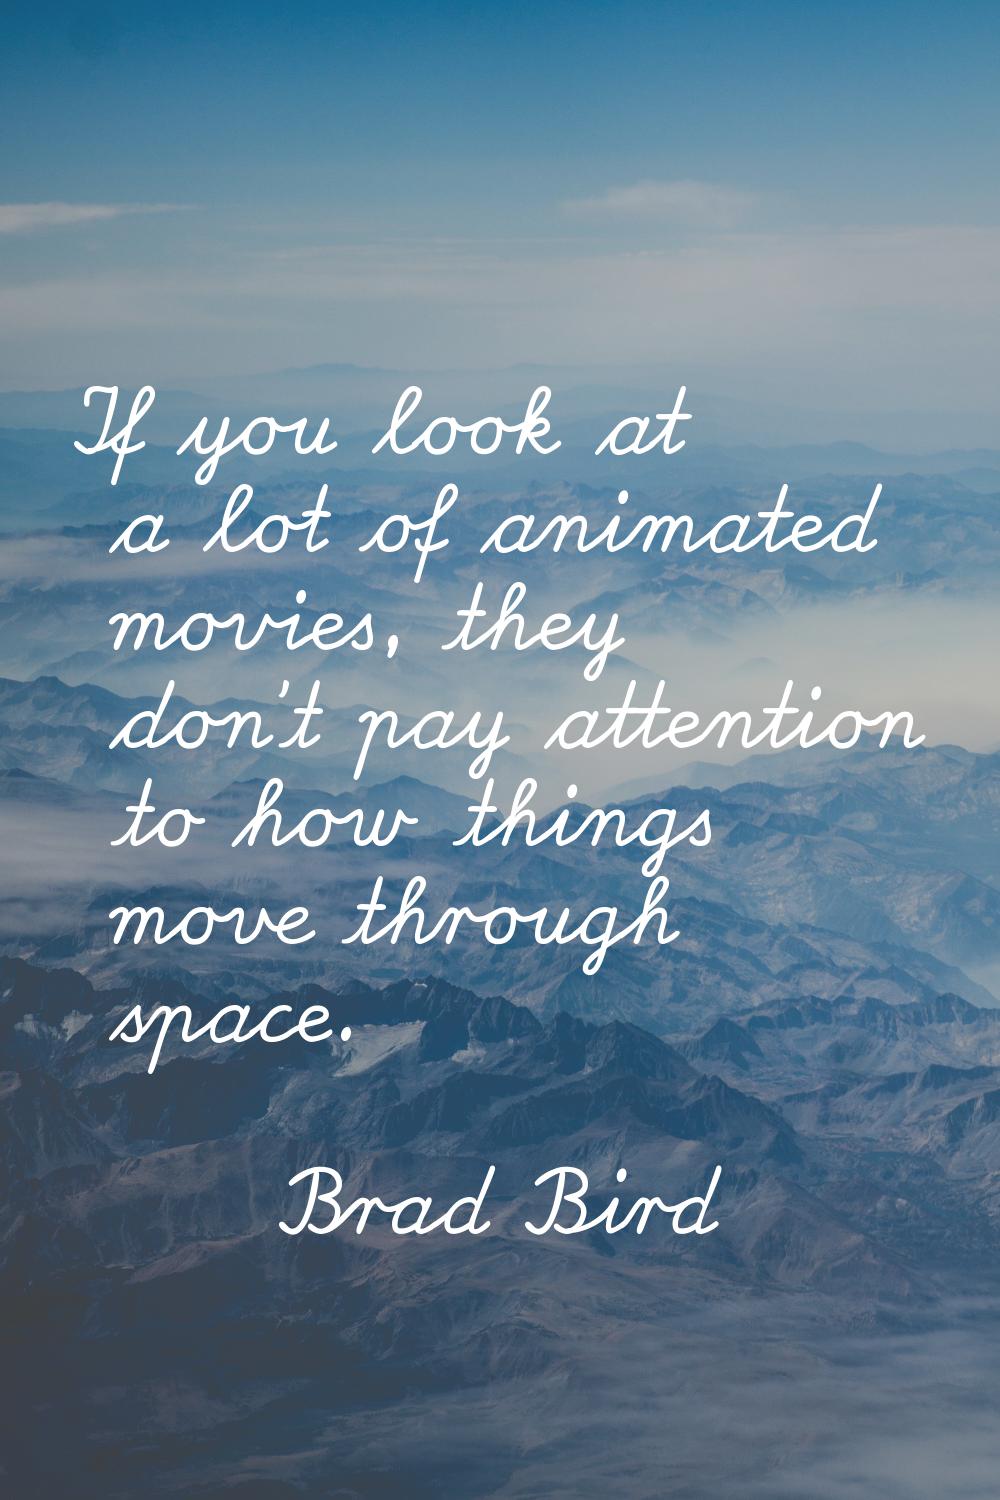 If you look at a lot of animated movies, they don't pay attention to how things move through space.